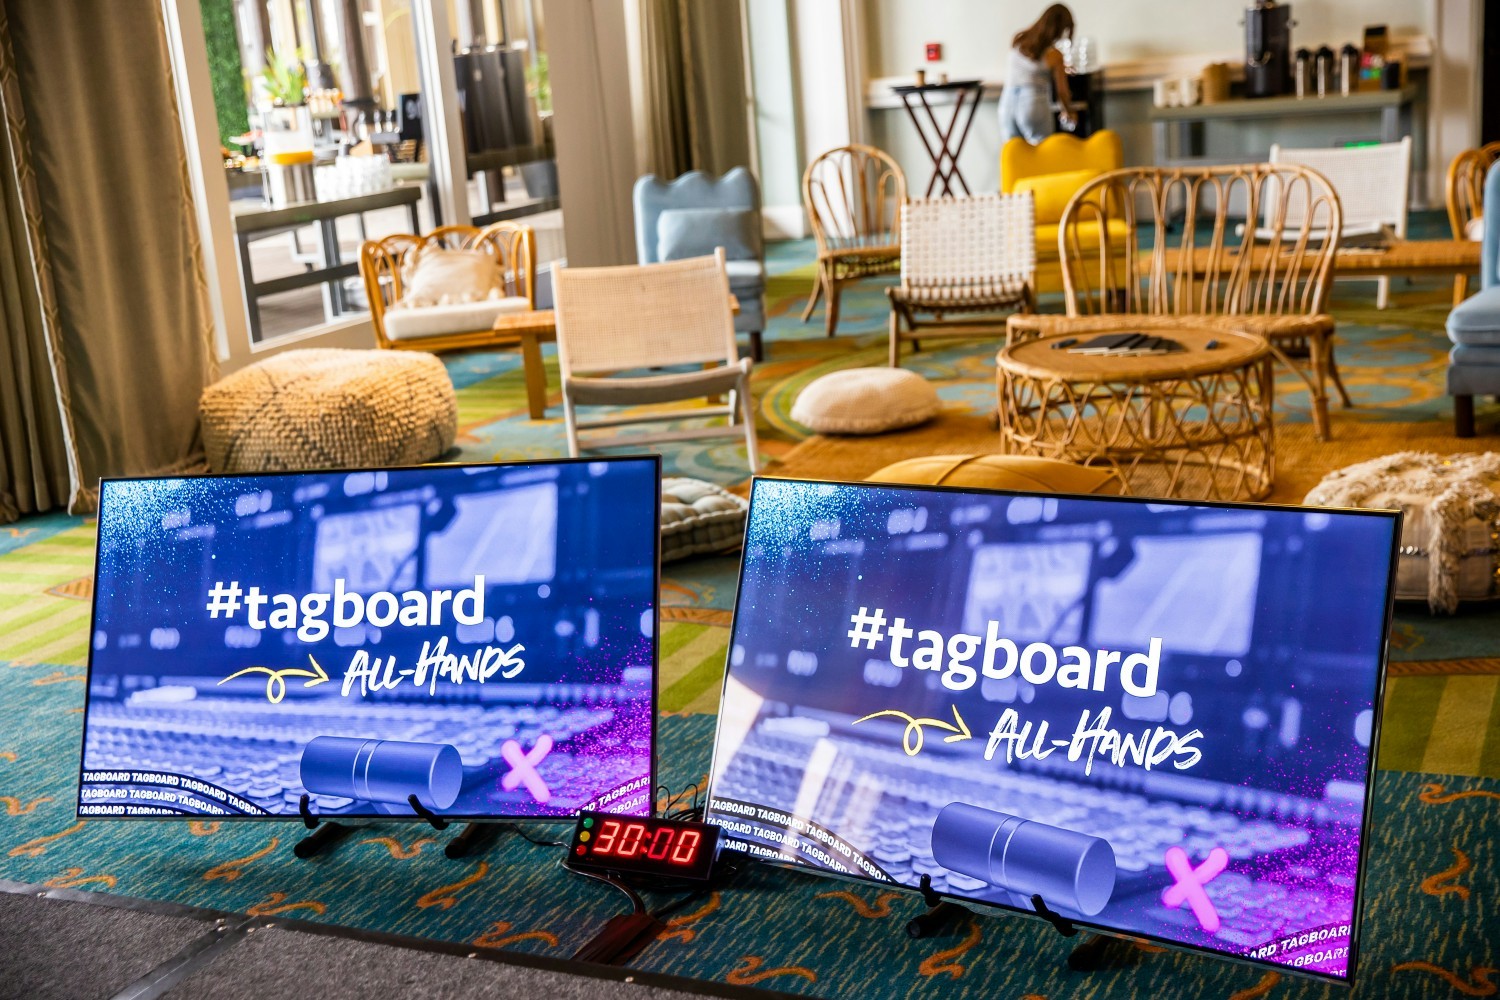 2022 Tagboard All Hands Welcome Session in San Diego, CA